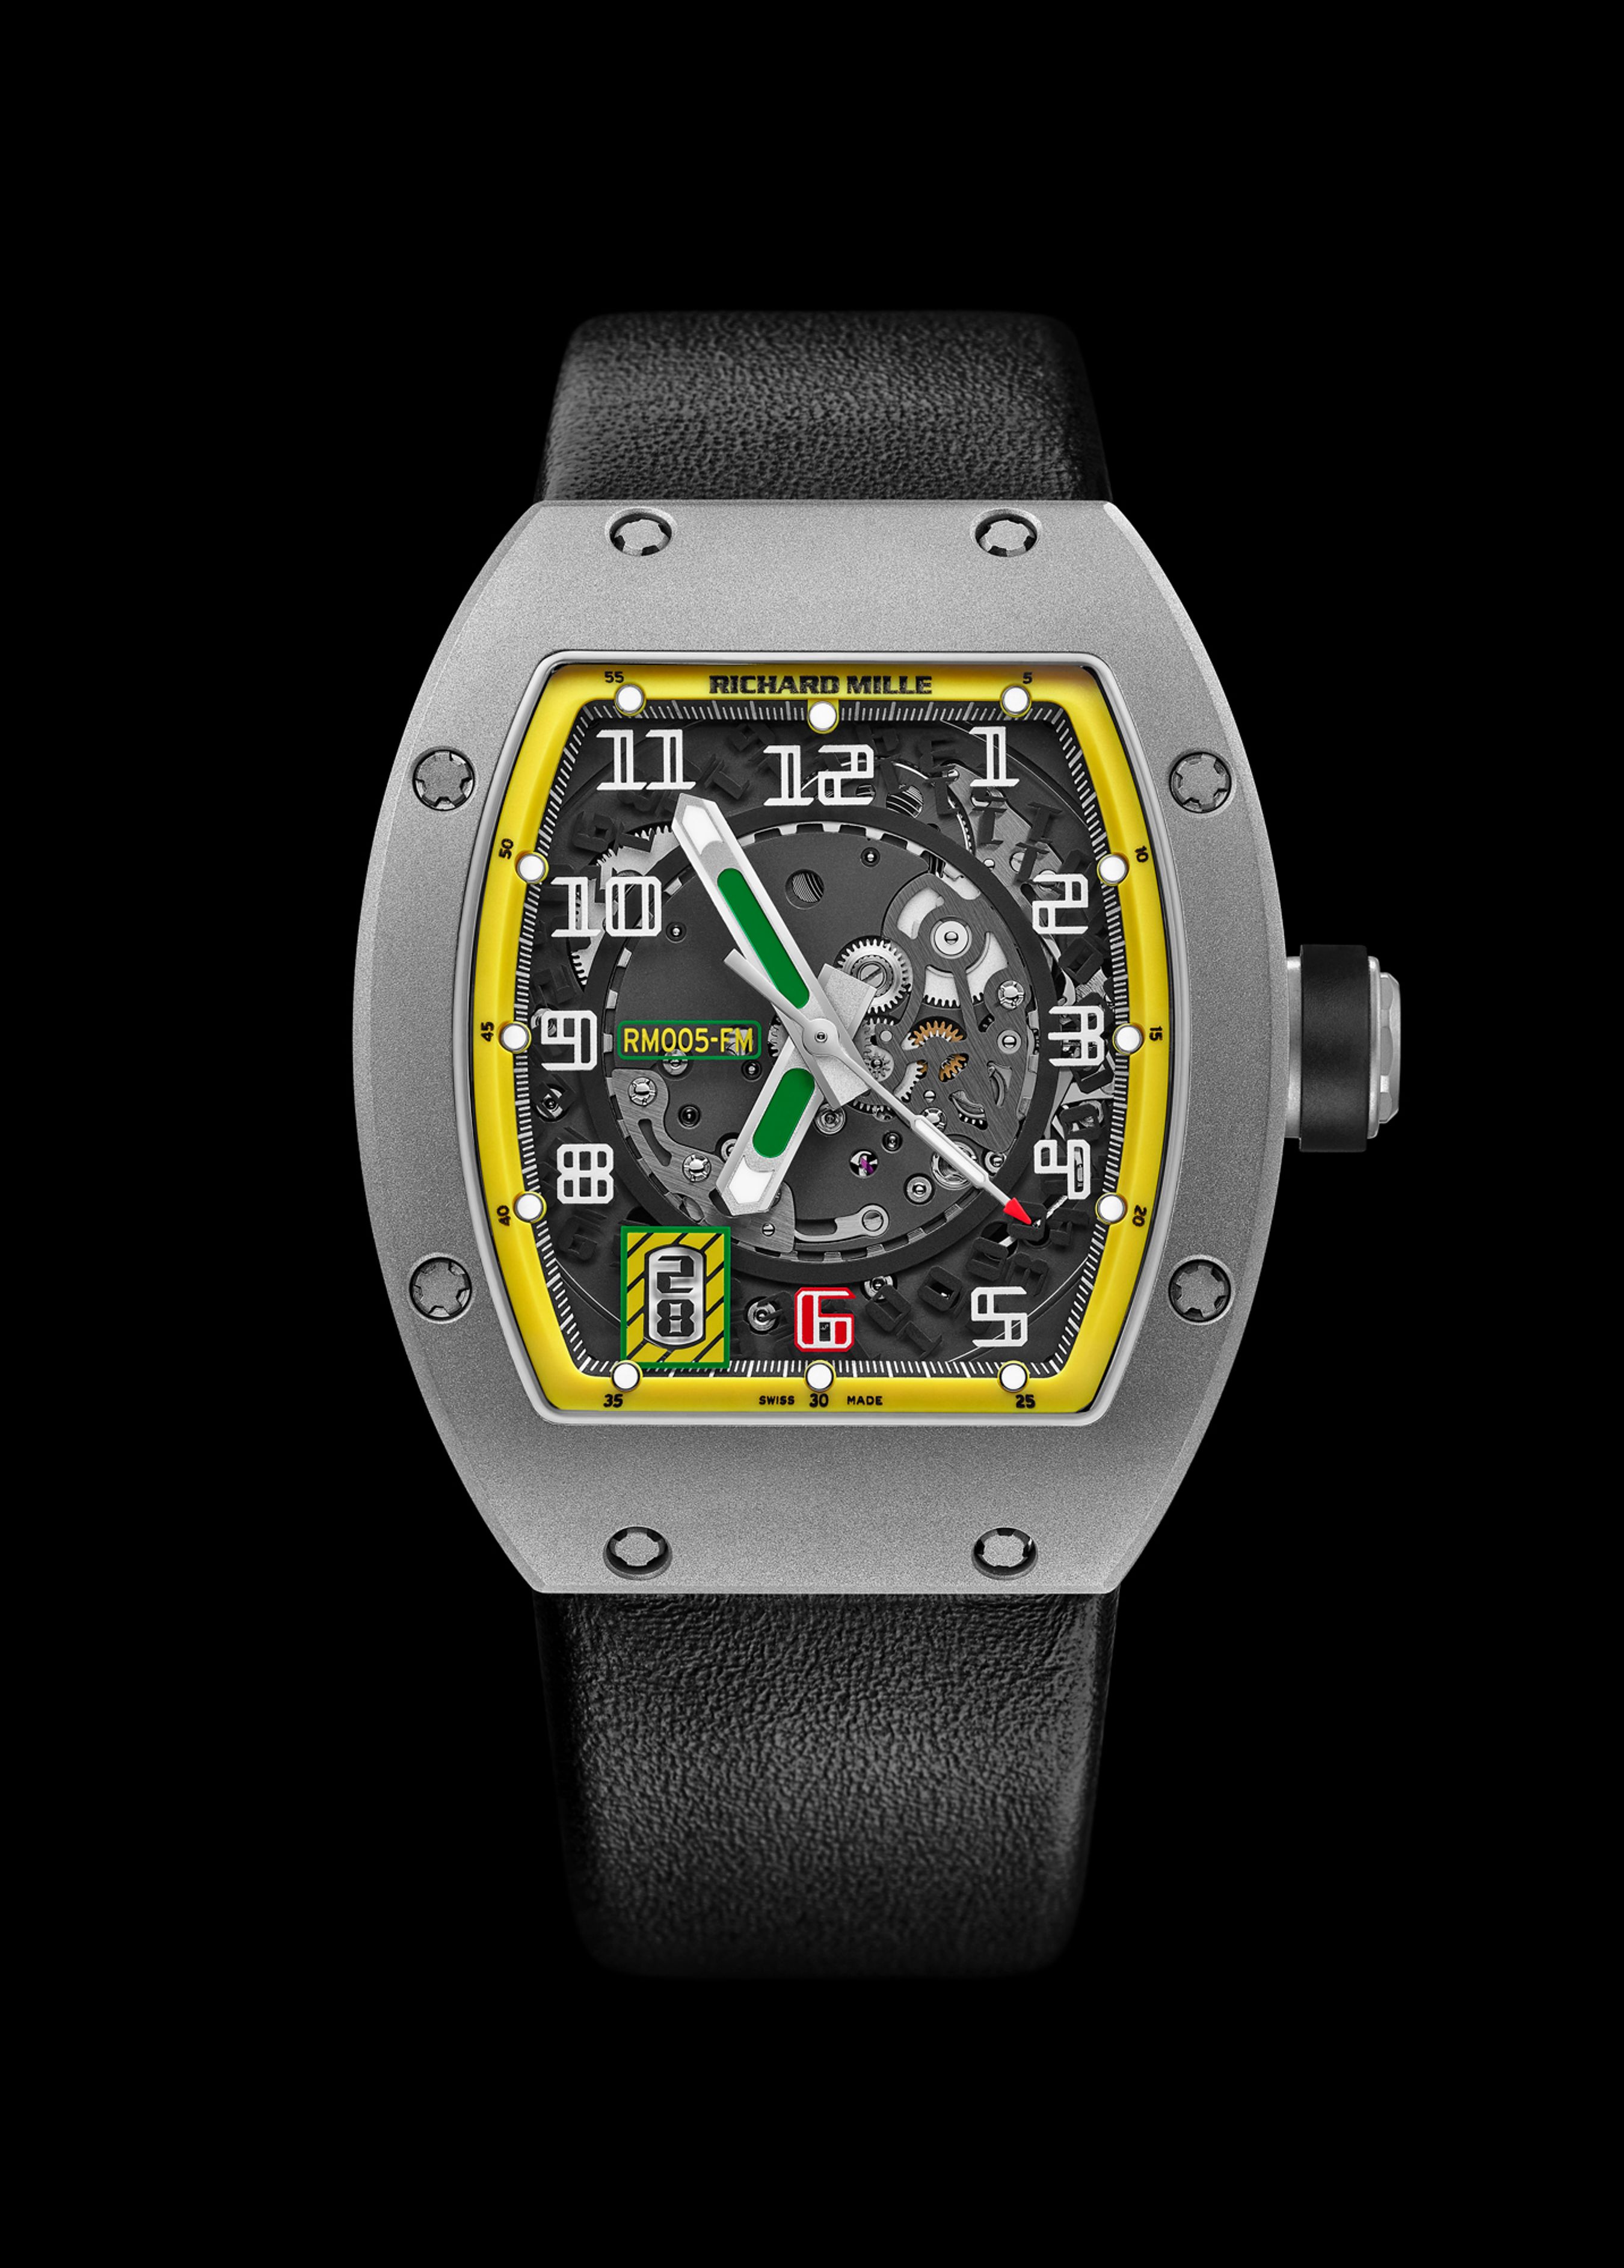 Pre-owned Richard Mille Watches, Why You Should Buy Them